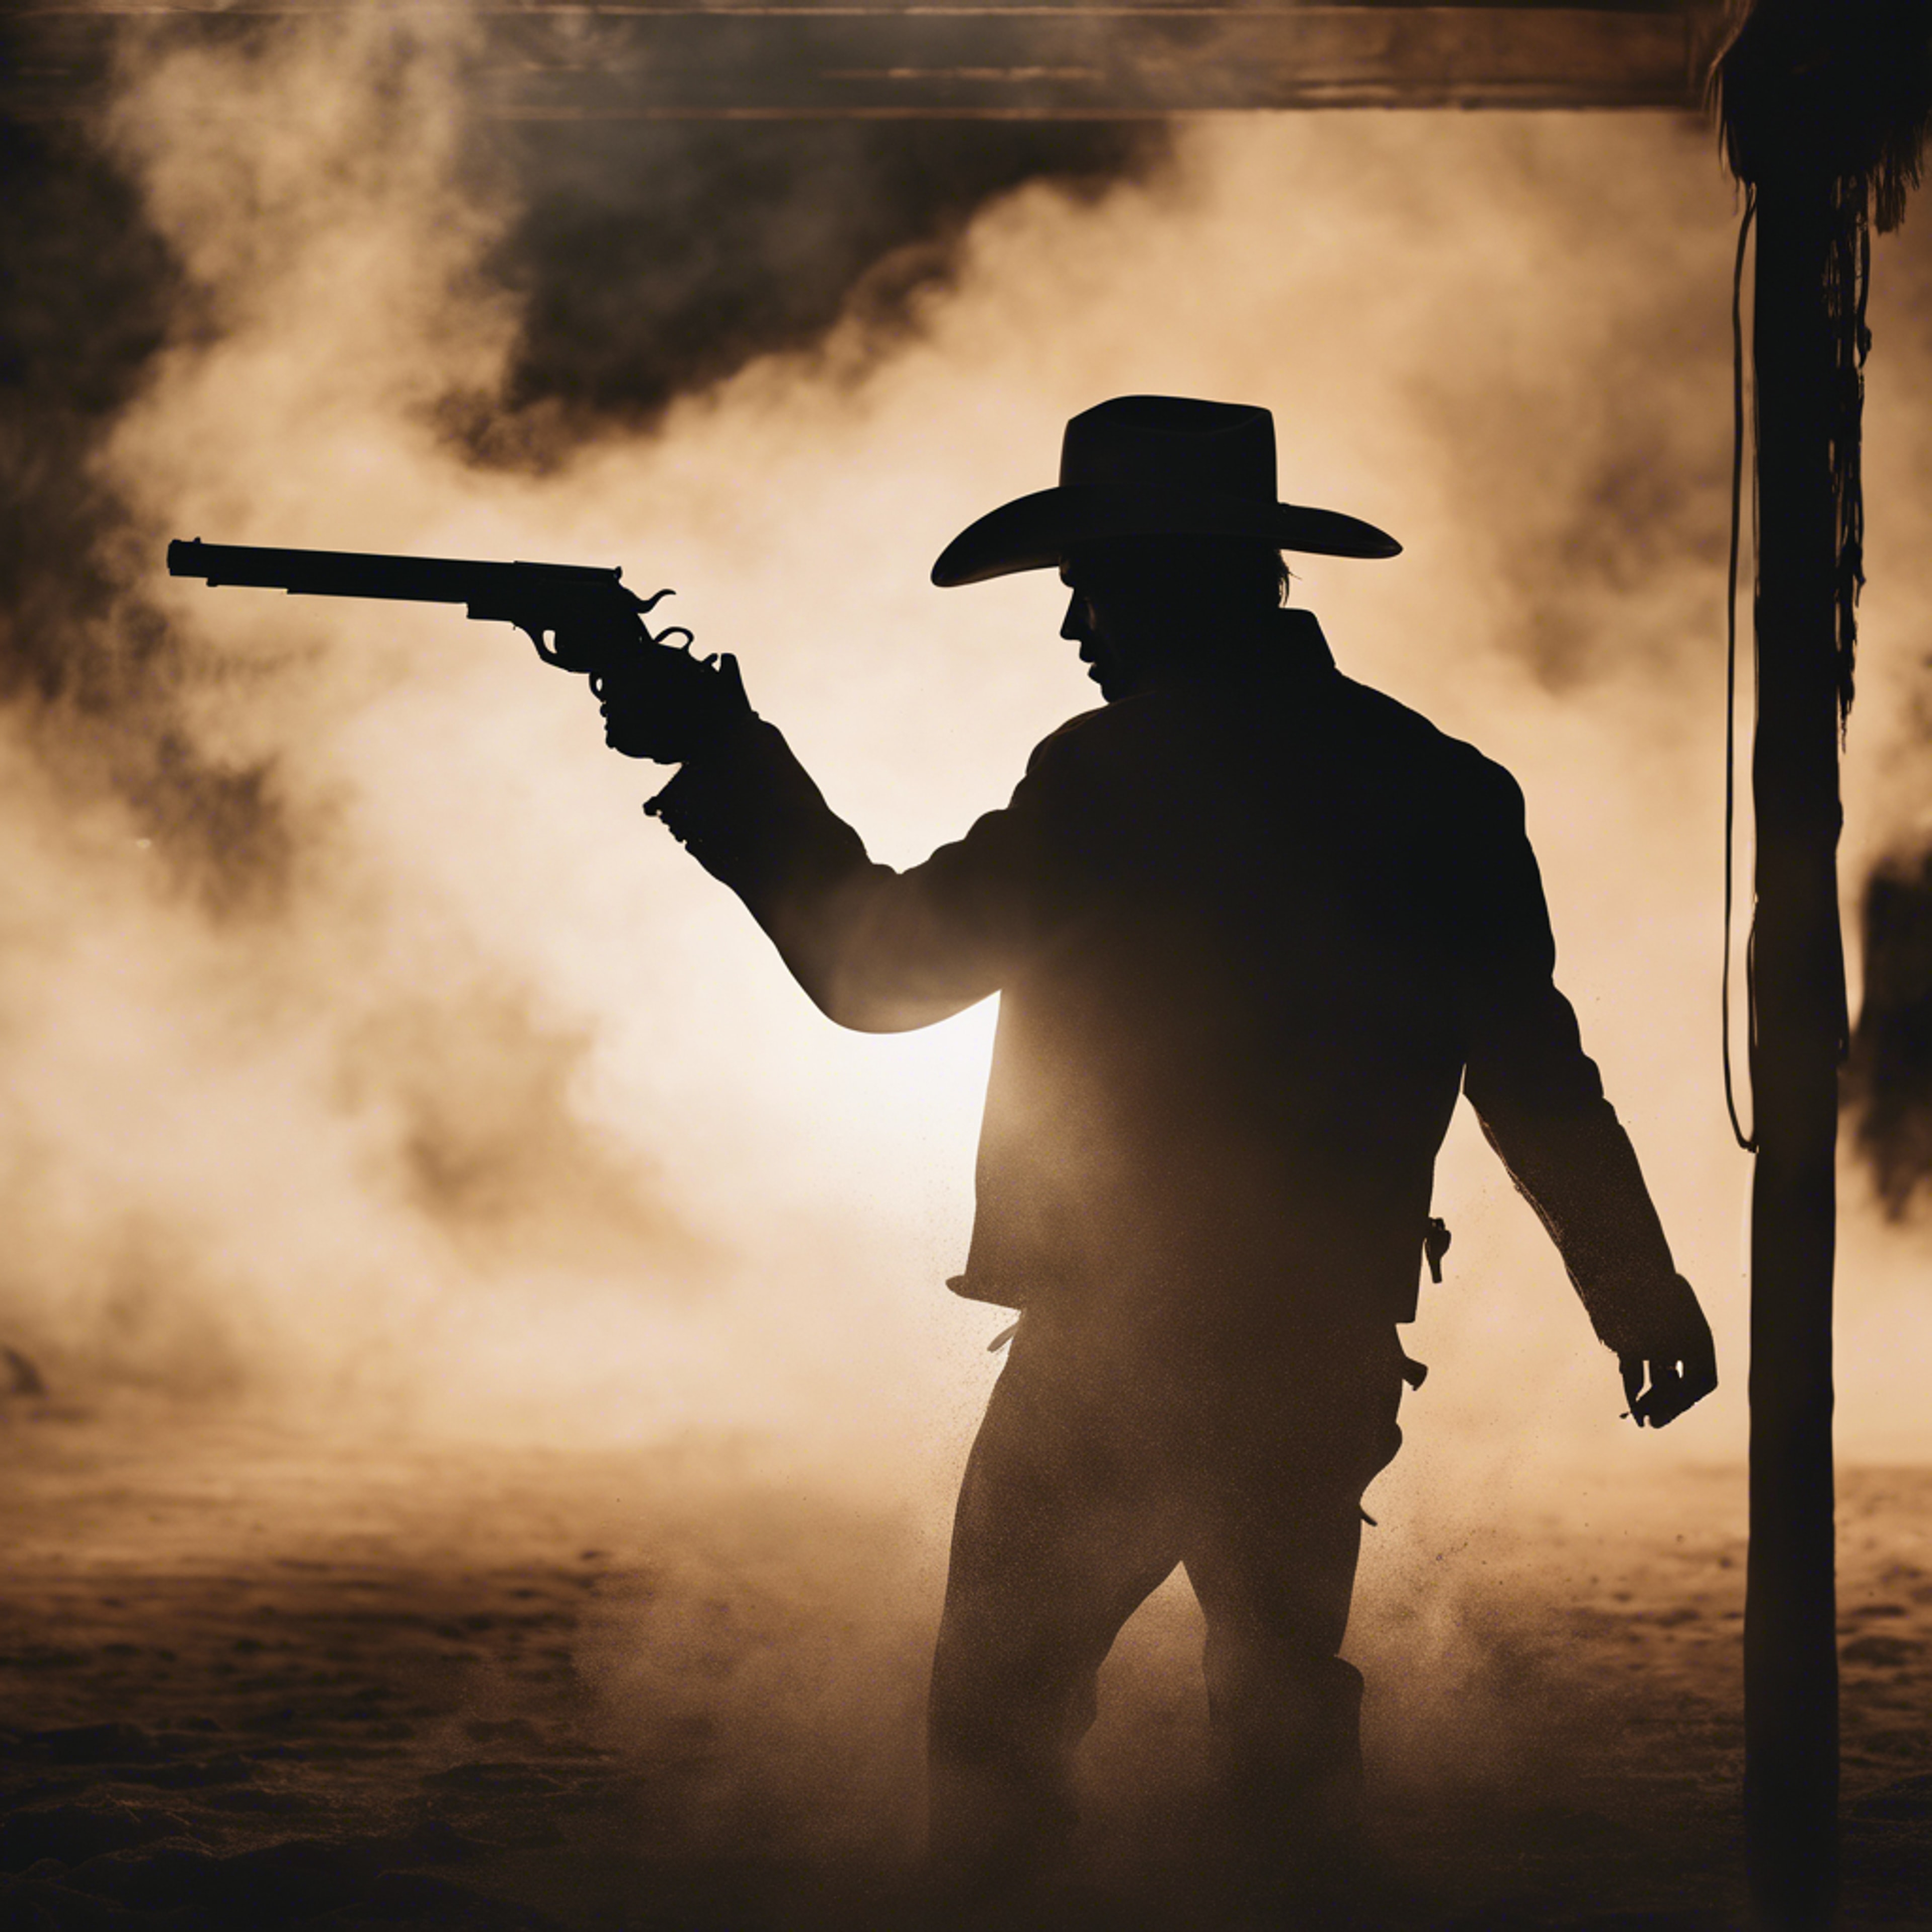 The silhouette of a cowboy enveloped in the smoky discharge of his fired gun.壁紙[d4700069895c420d805f]